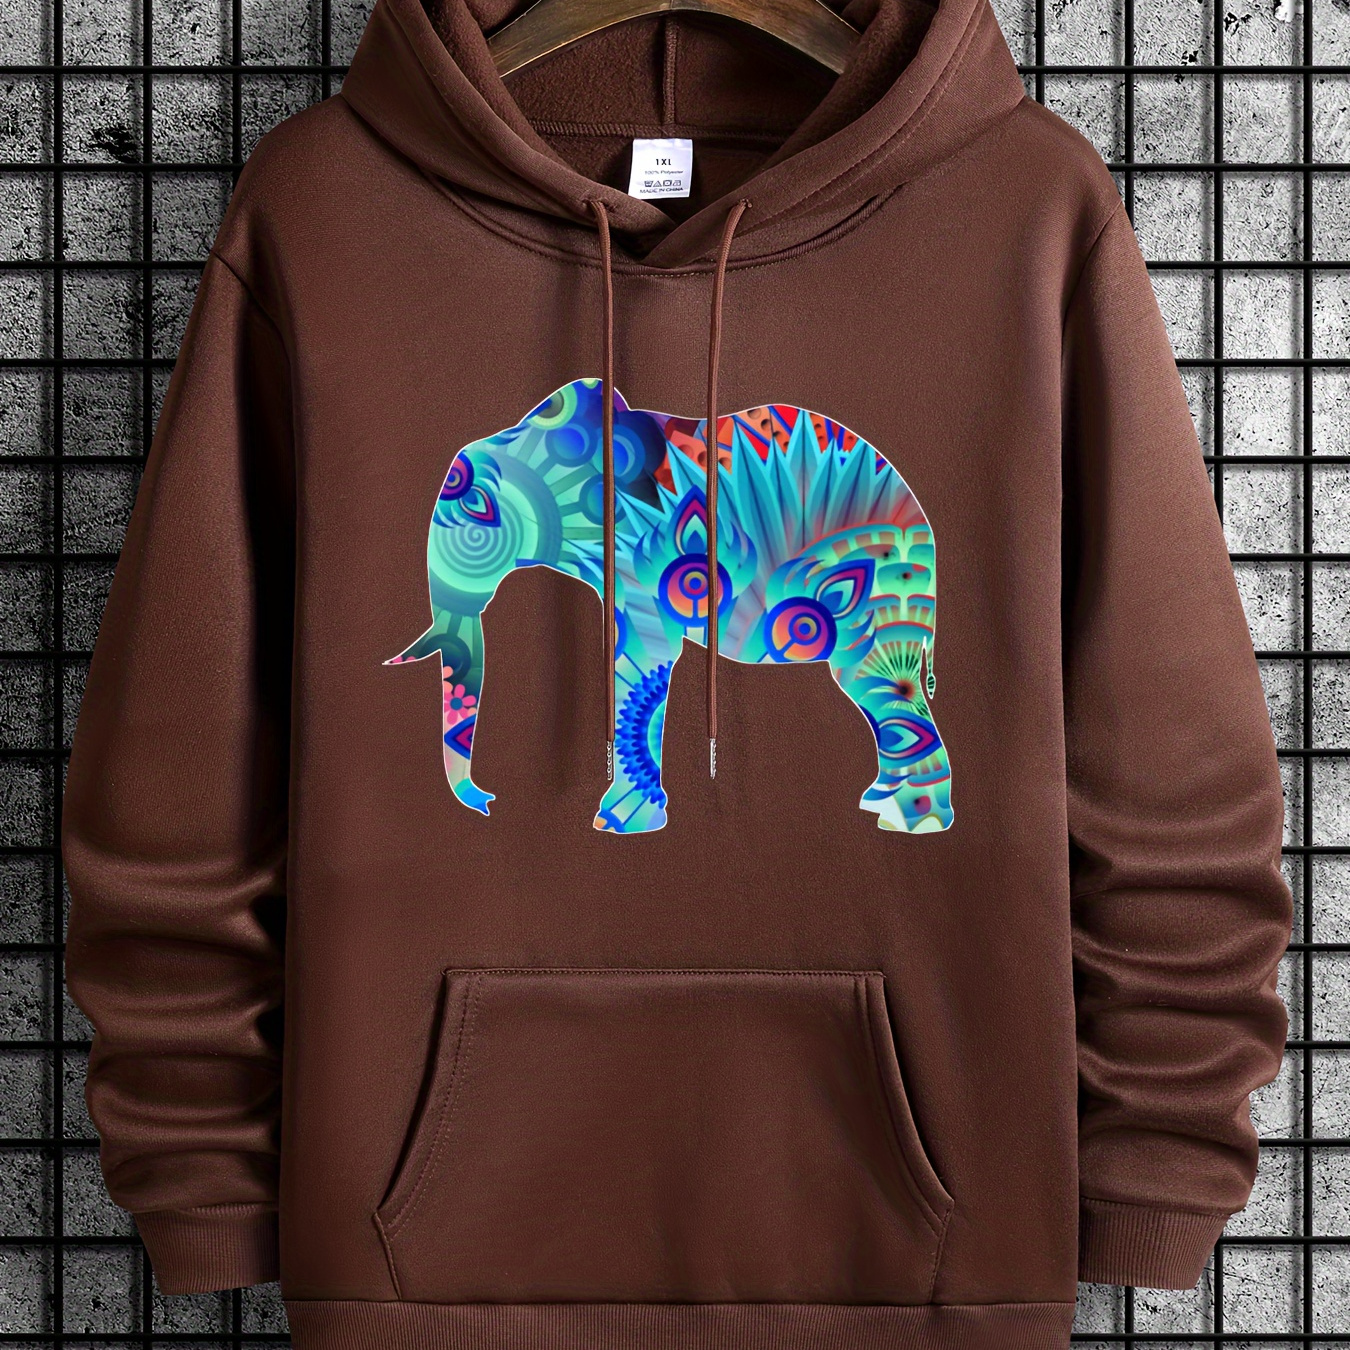 

Elephant Print Sweatshirt, Men's Long Sleeve Hoodies Street Casual Sports And Fashionable With Kangaroo Pocket, For Outdoor Sports, For Autumn Winter, Can Be Paired With Hip-hop Necklace